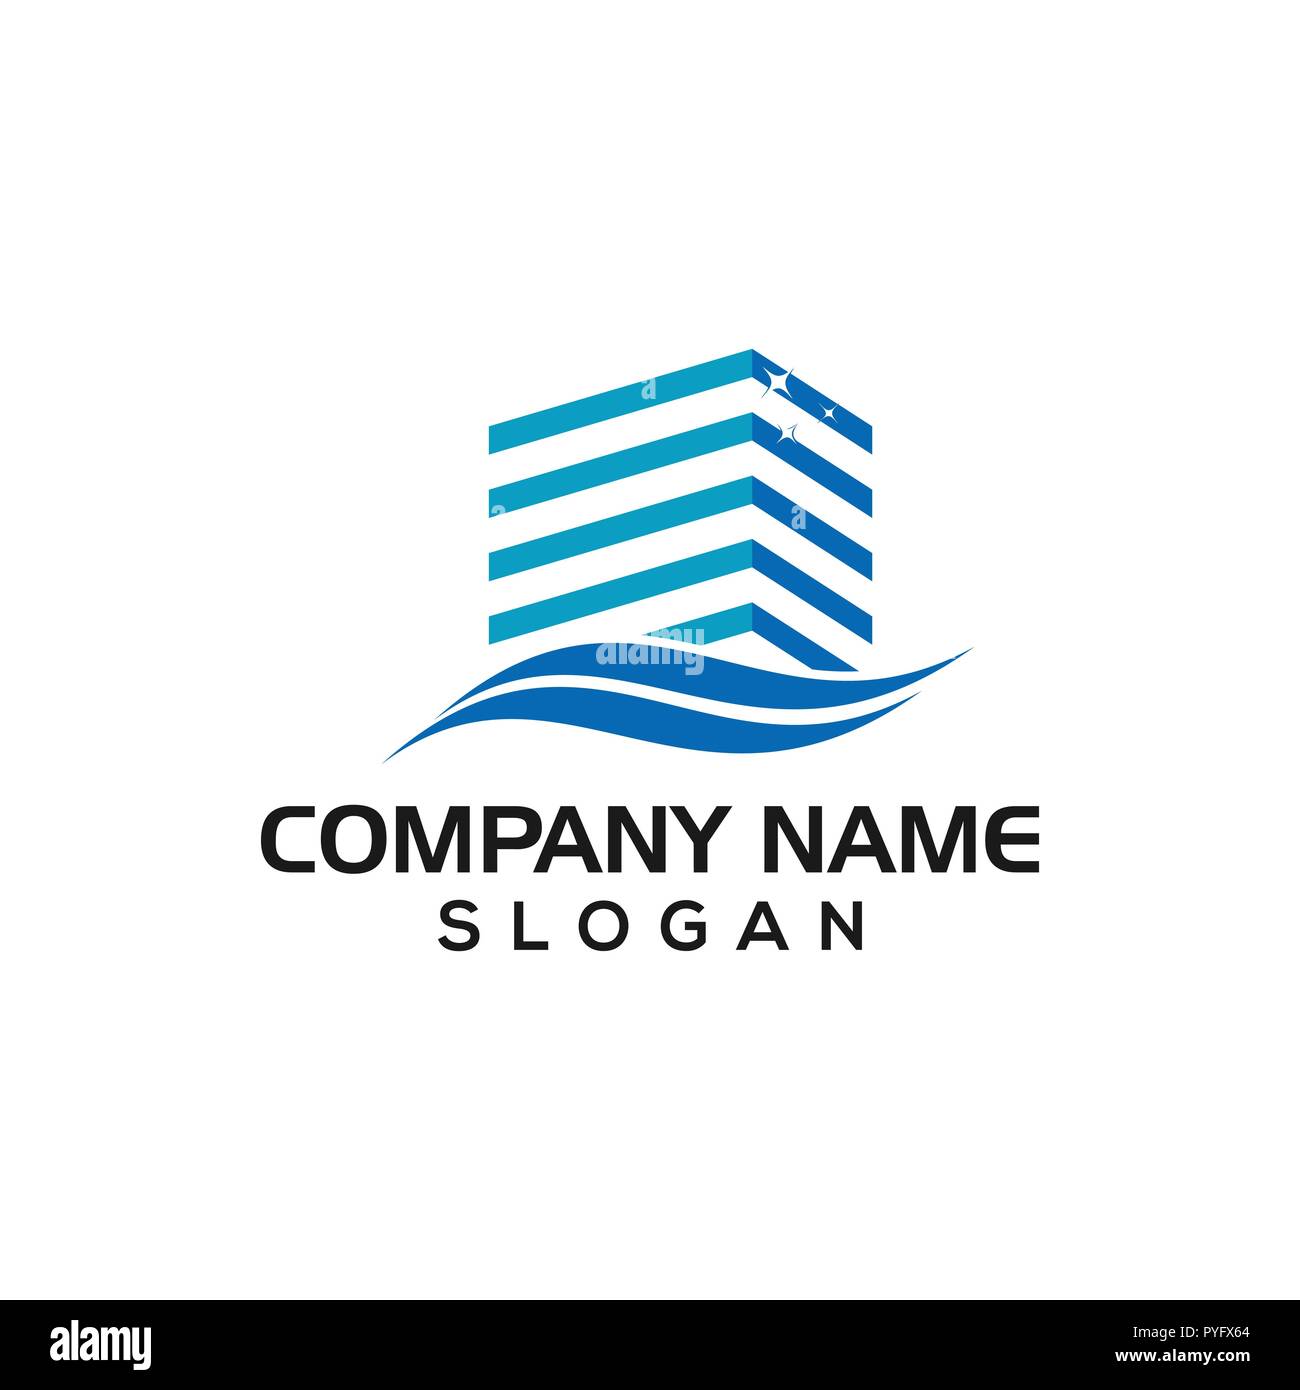 Clean buildings, shiny building concepts for business logo templates, cleaning, maintenance, building, etc. Stock Photo